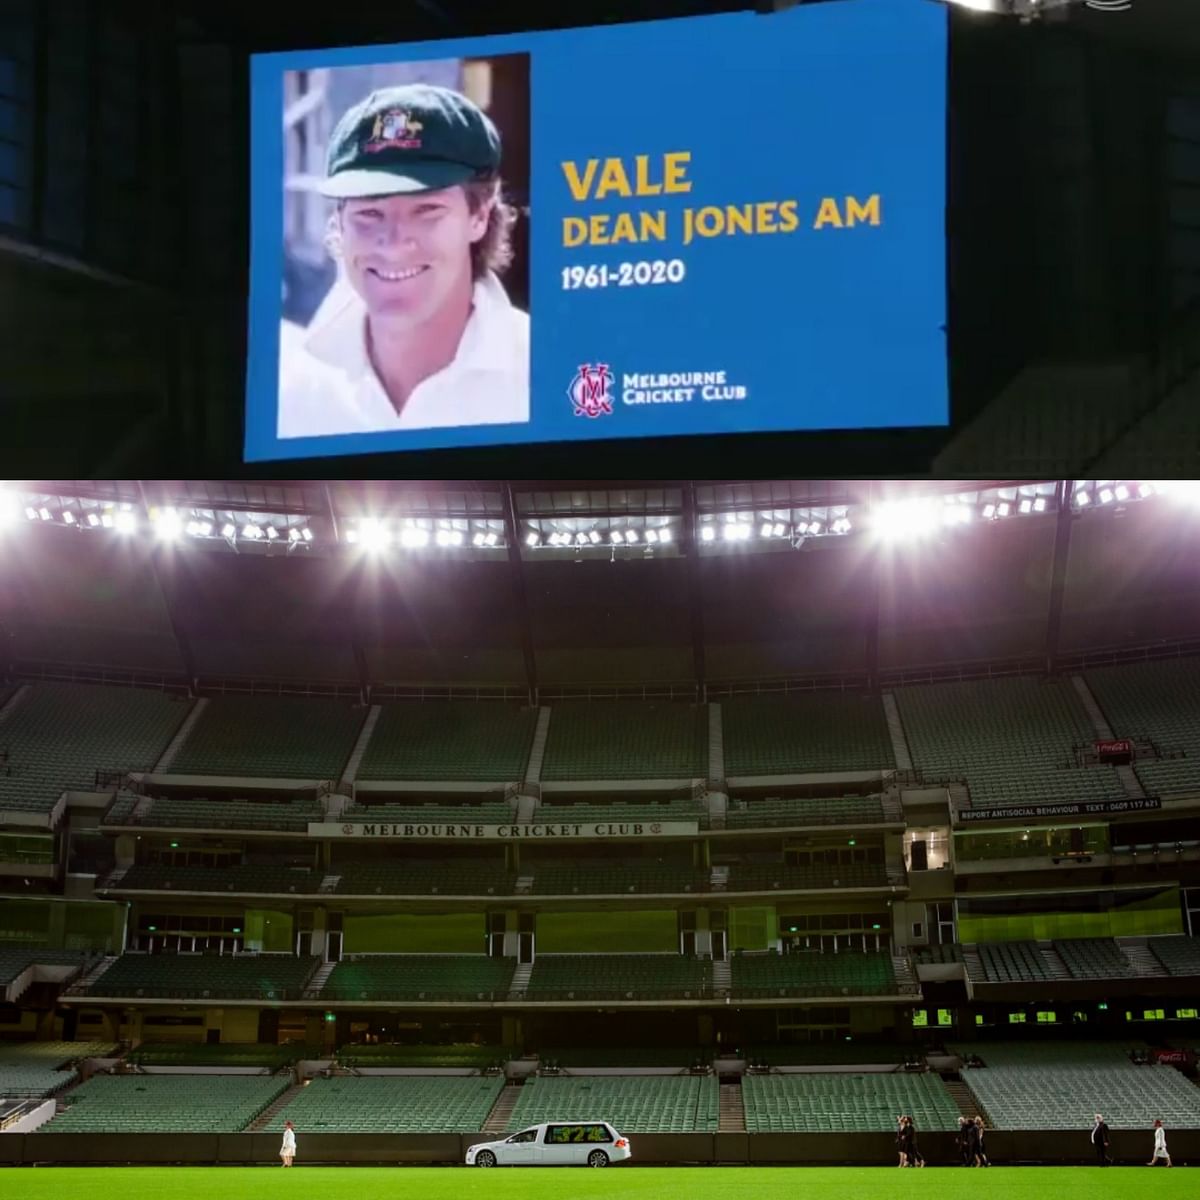 Due to the COVID-19 restrictions, only 10 of the Jones’ closest family members attended his last lap at the MCG.